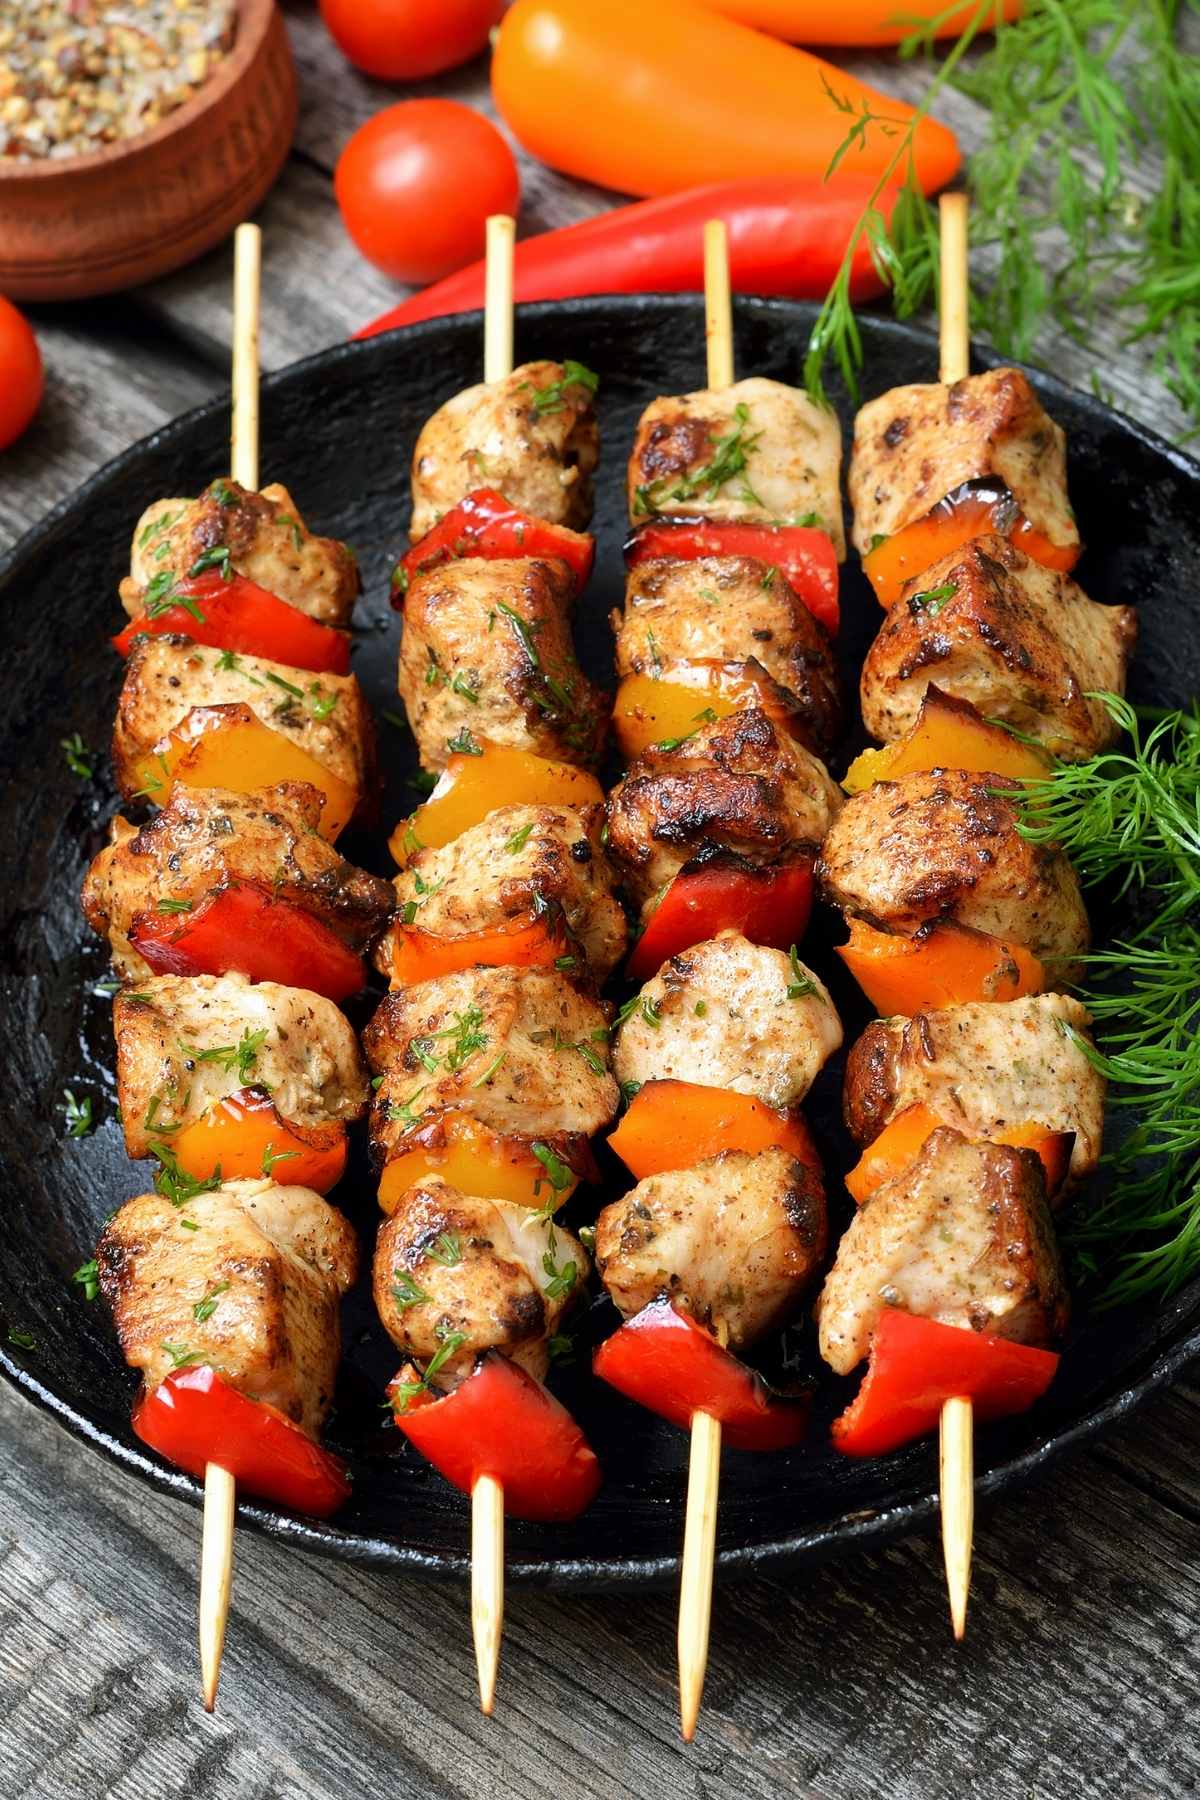 When the weather is warm, it’s always fun to have a meal outside on the backyard deck. One dish that’s easy to make and always gets rave reviews is Grilled Chicken on a Stick. It’s quick, tasty, and pairs well with salads, rice, or potatoes!